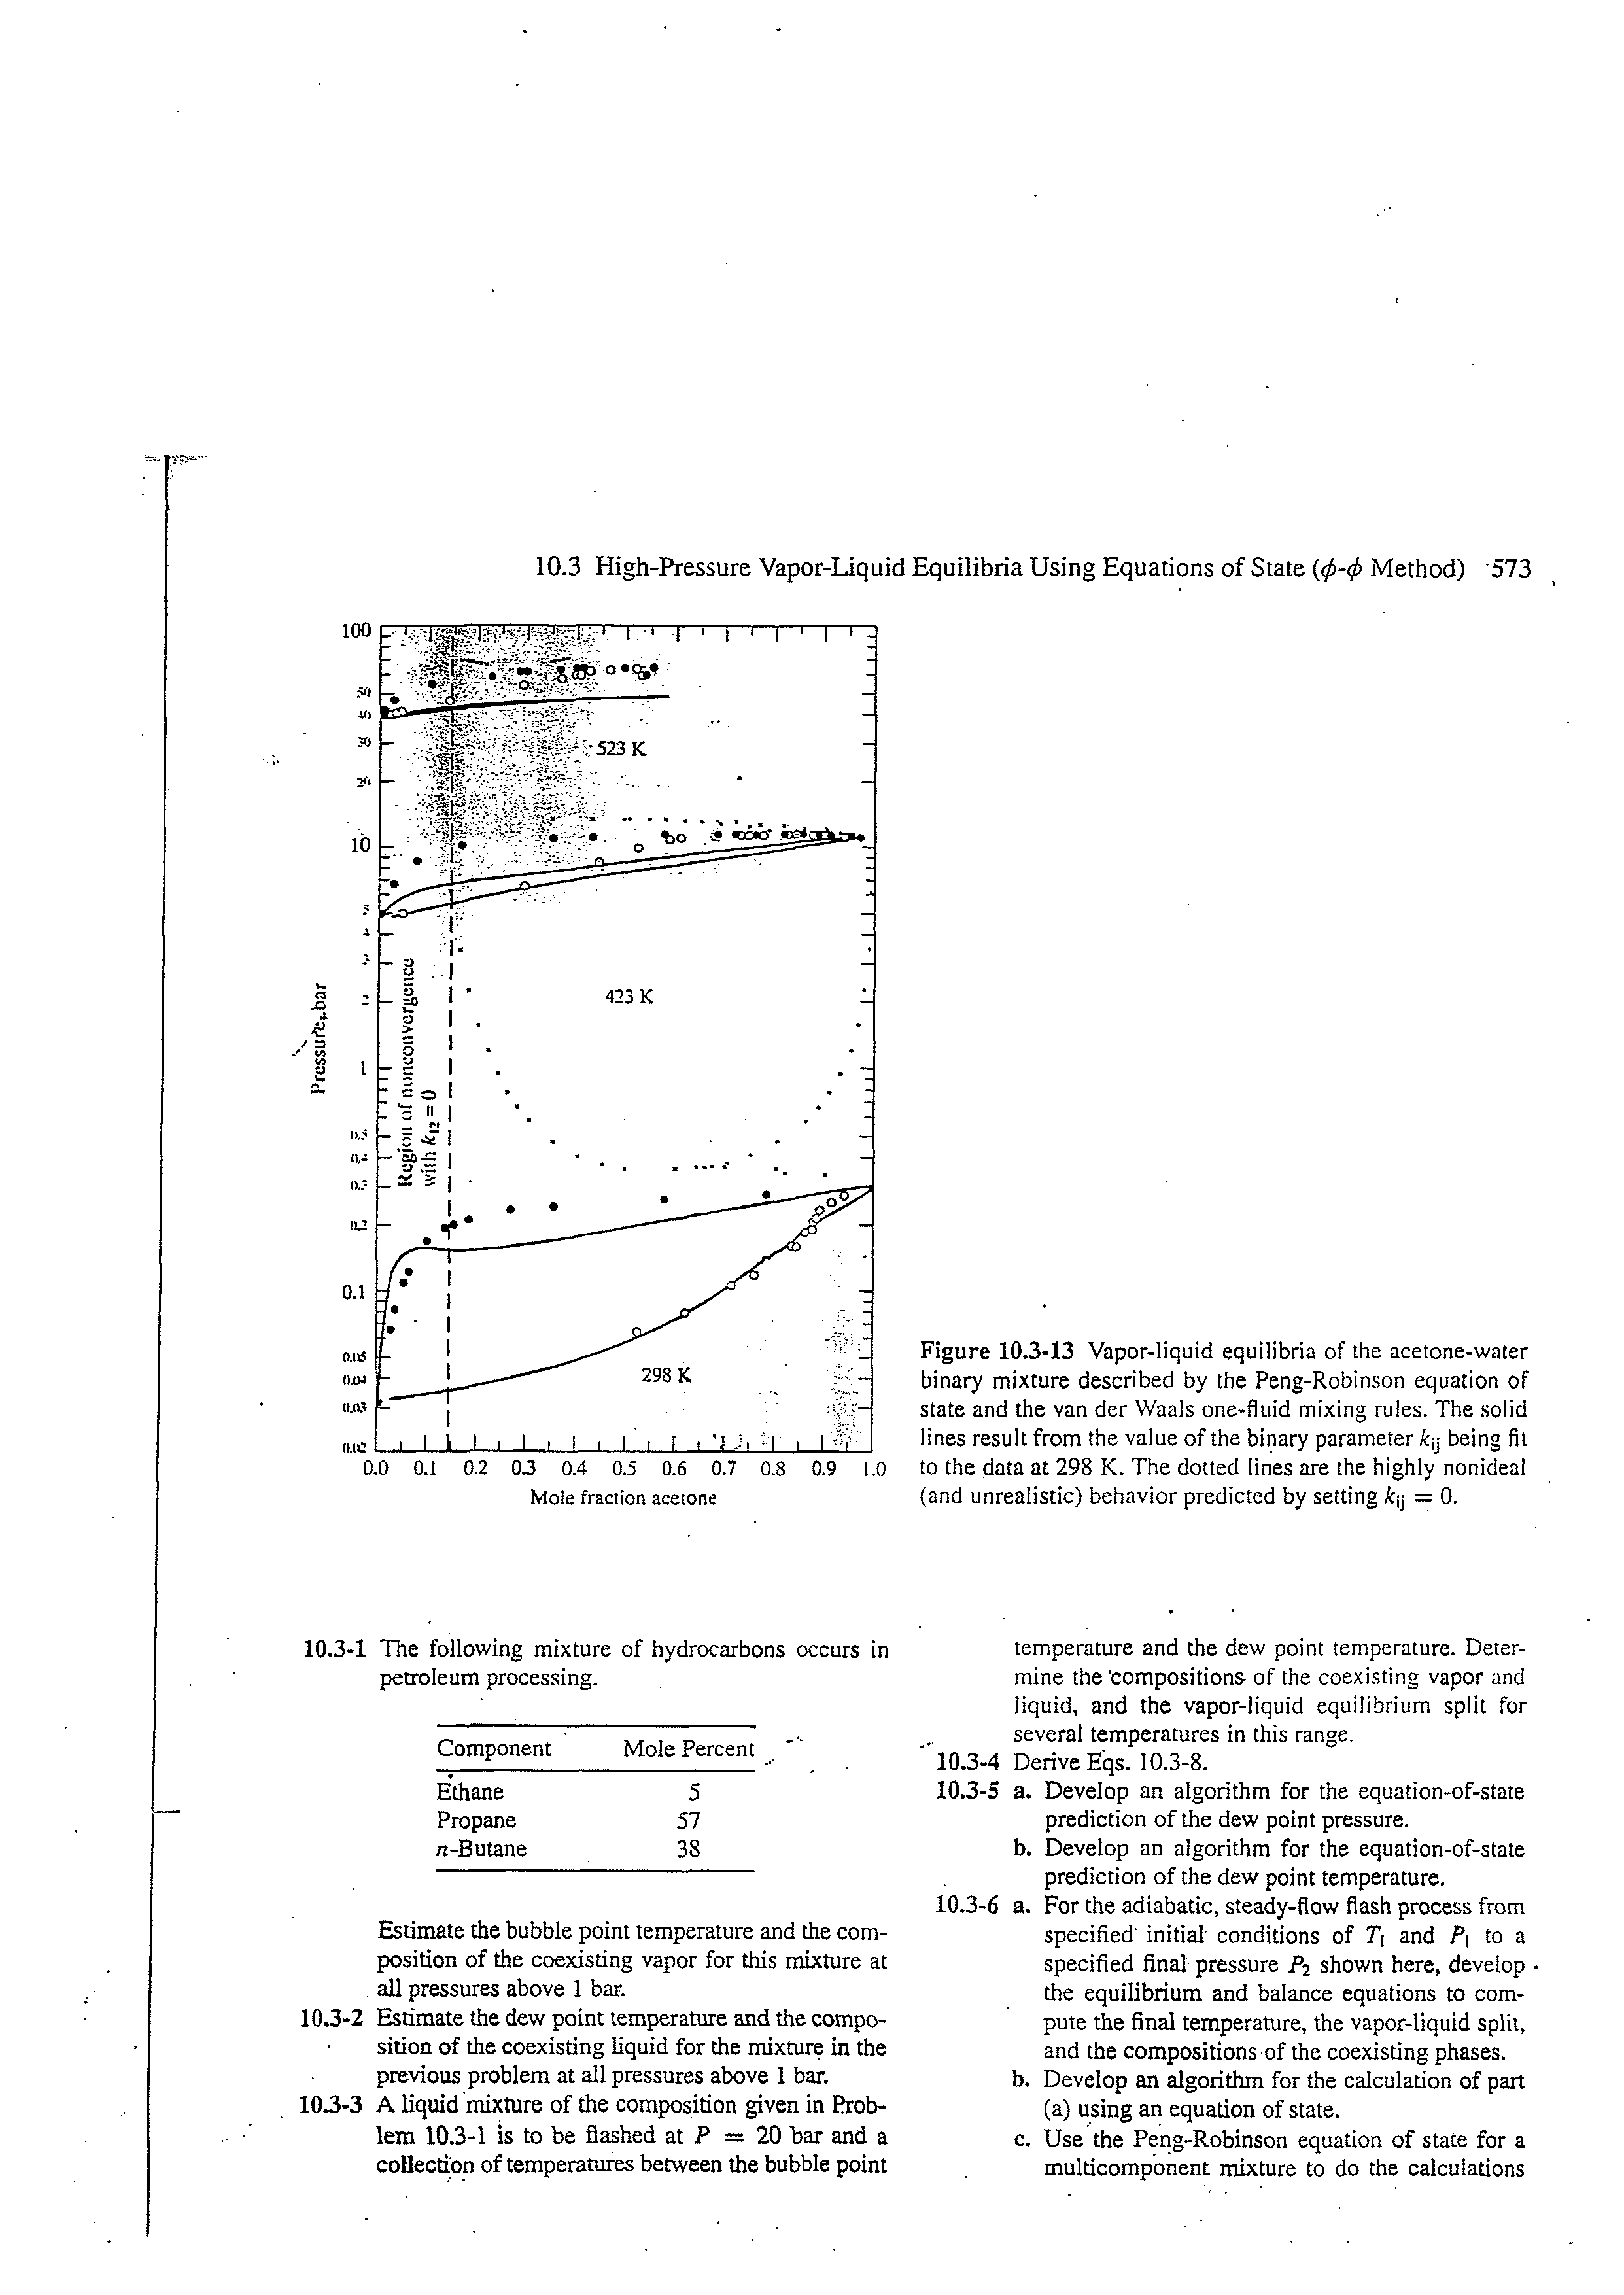 Figure 10.3-13 Vapor-liquid equilibria of the acetone-water binary mixture described by the Peng-Robinson equation of state and the van der Waals one-fluid mixing rules. The solid lines result from the value of the binary parameter xy being fit to the data at 298 K. The dotted lines are the highly nonideal (and unrealistic) behavior predicted by setting k j = 0.